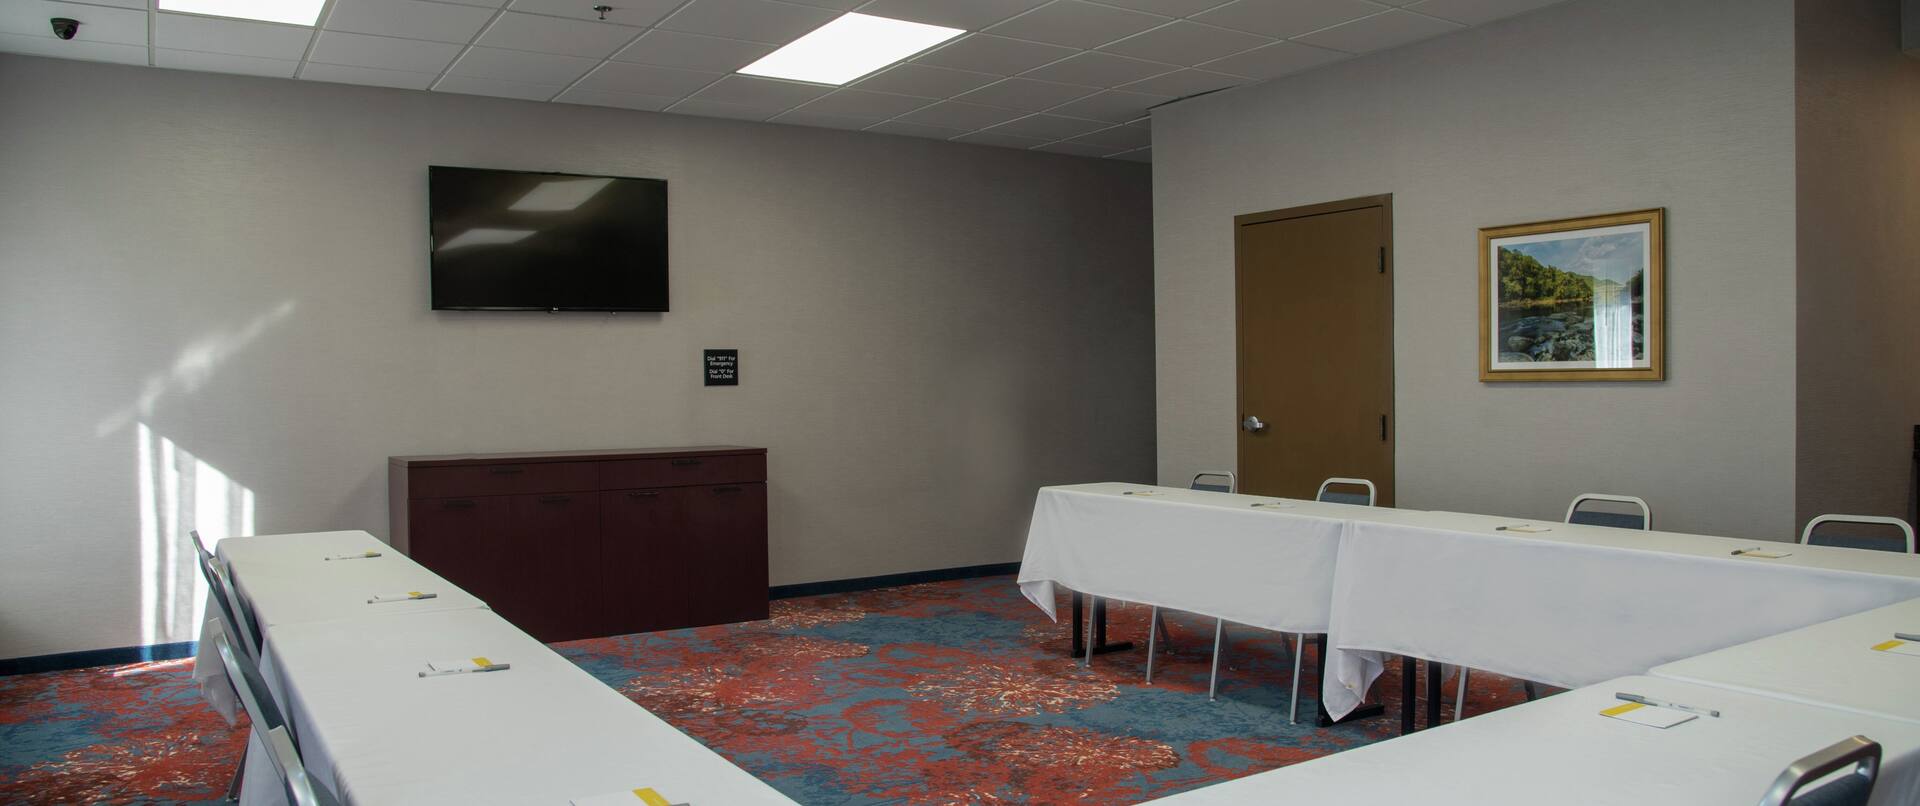 Meeting Room with U-Shaped Table and Room Technology